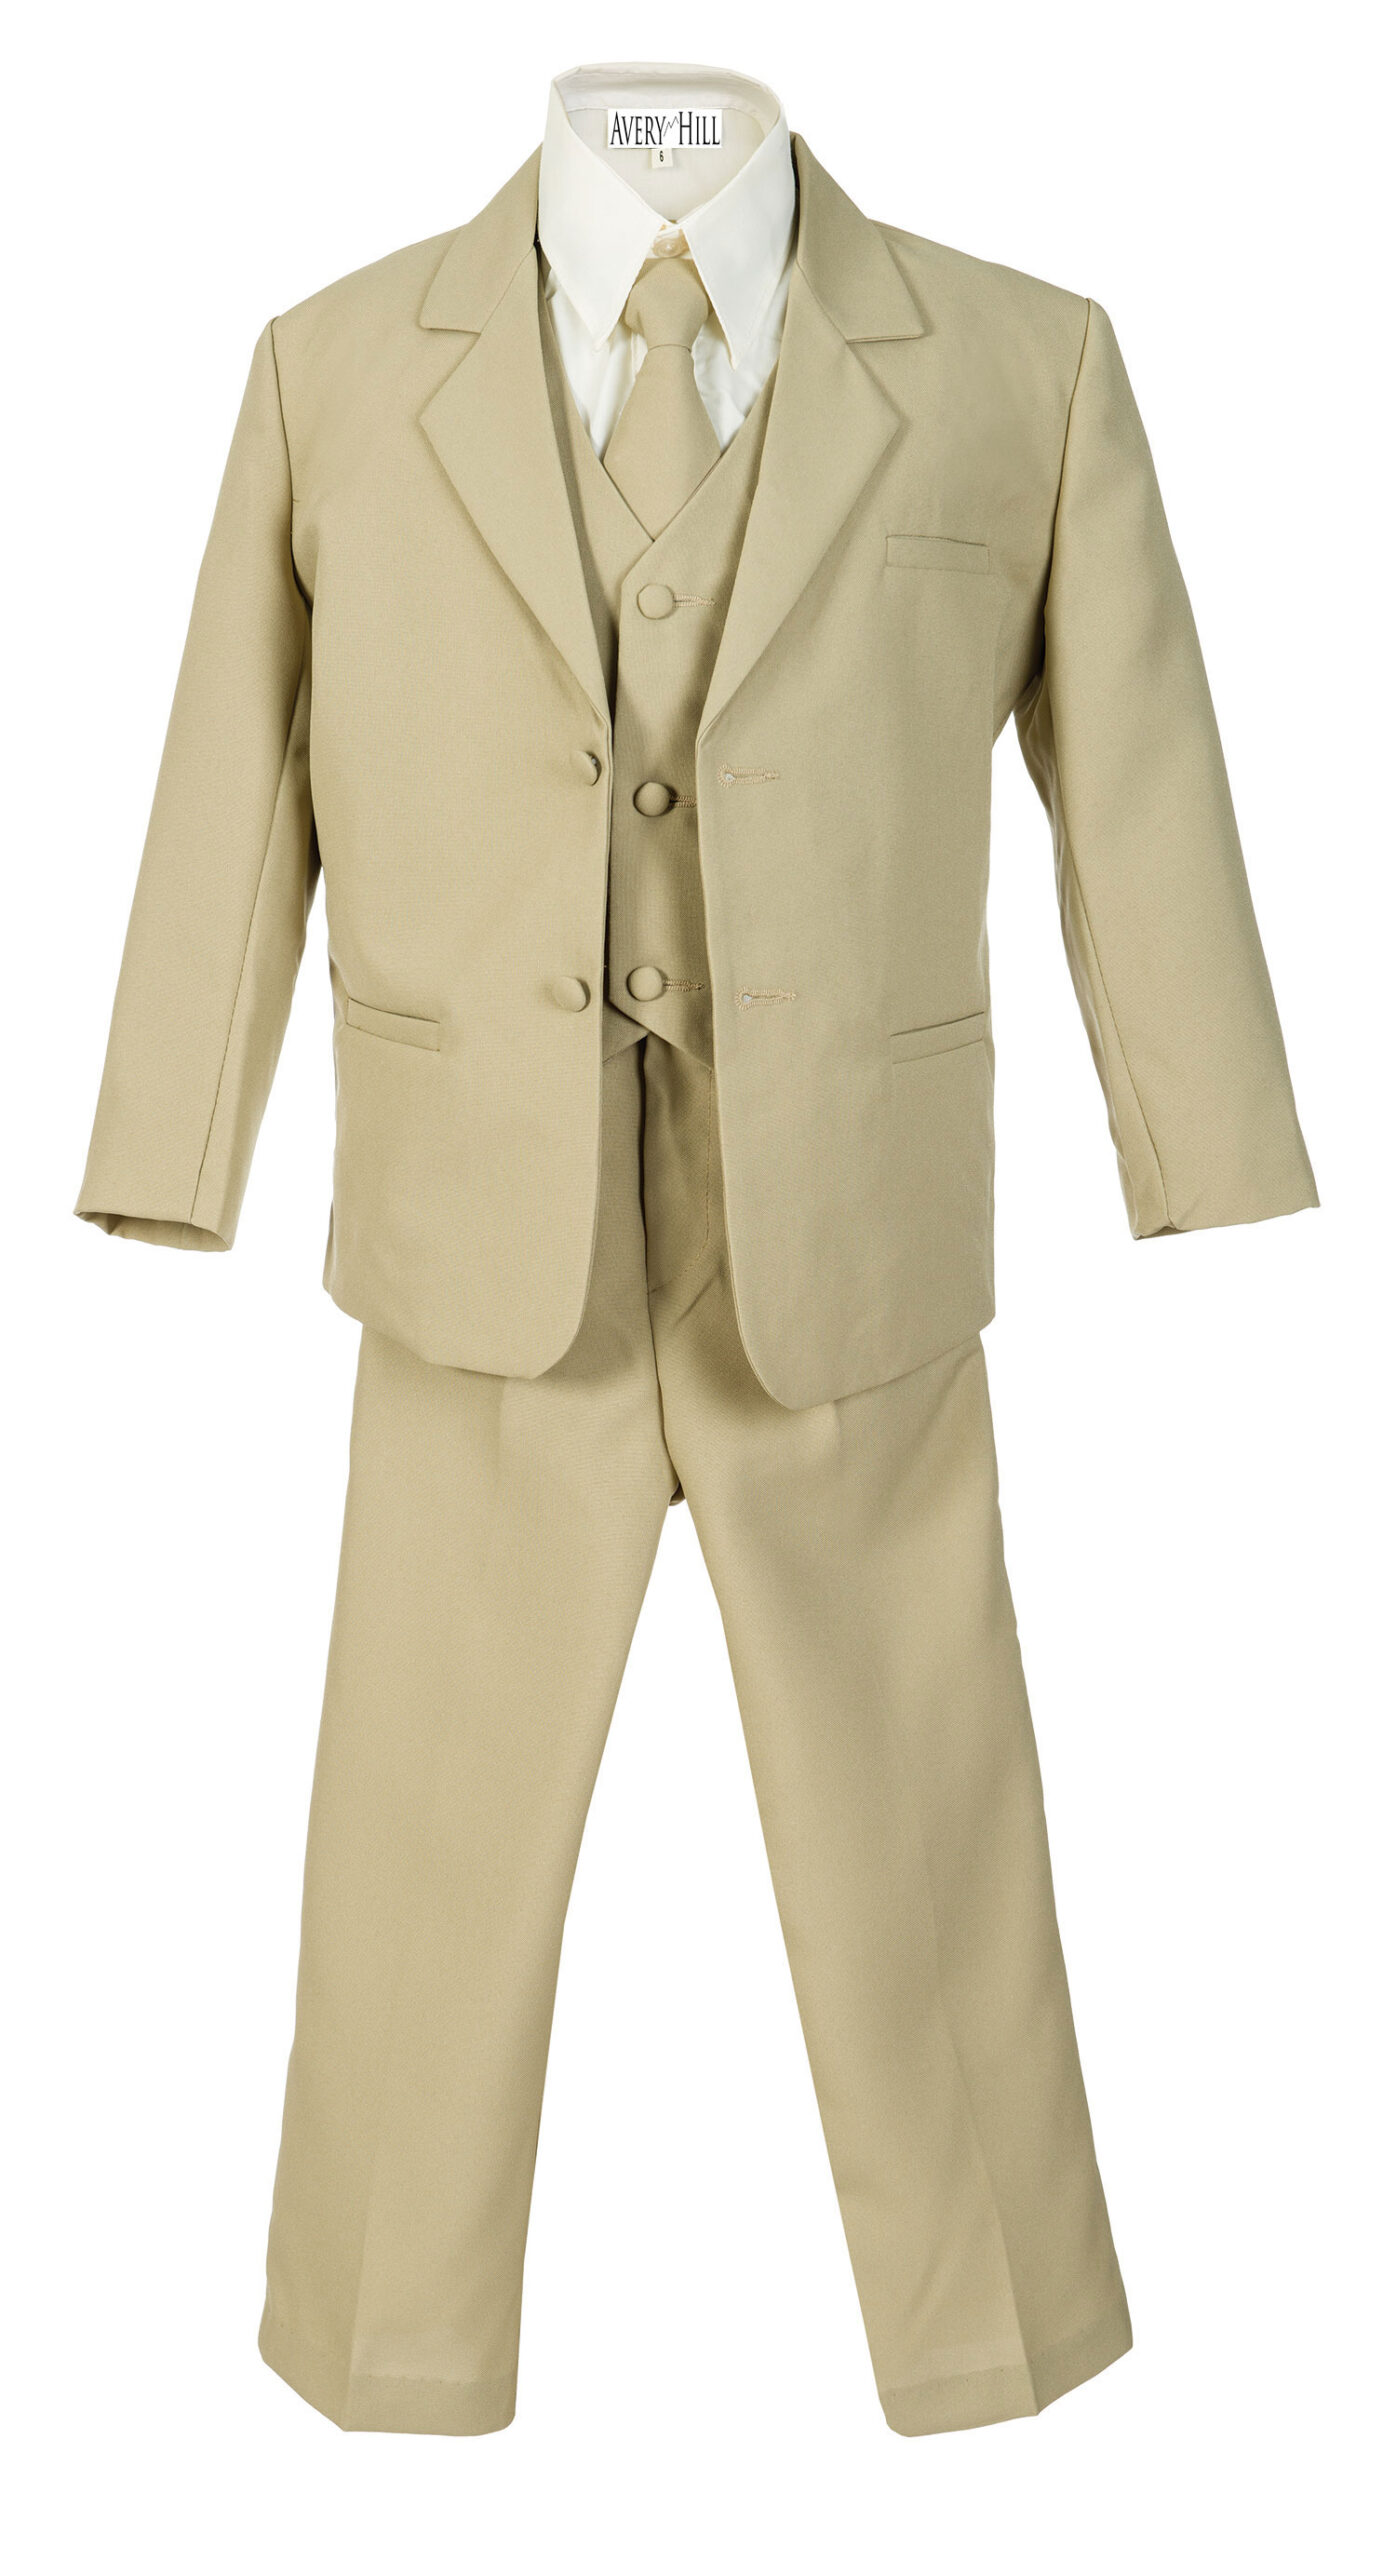 Avery Hill Boys Formal 5 Piece Suit with Shirt and Vest Khaki - 6